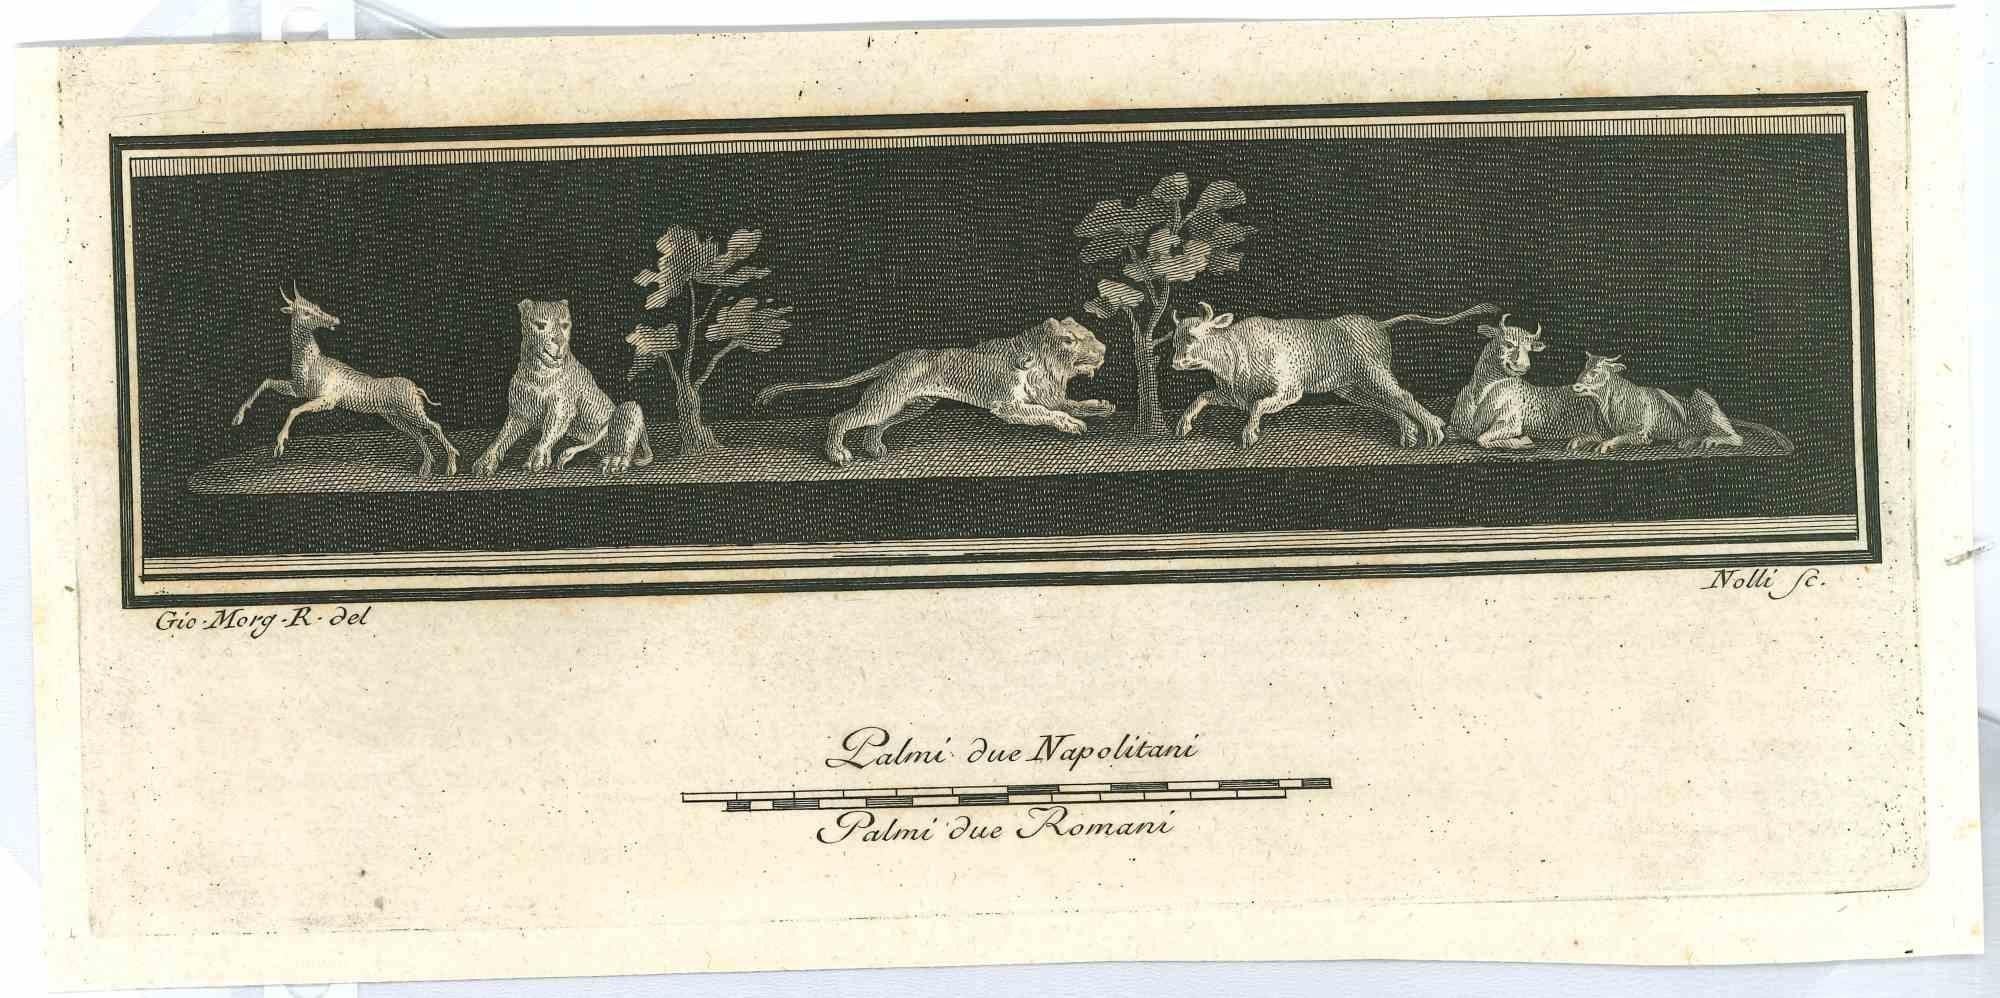 Ancient Roman Frescoes from the series "Antiquities of Herculaneum", is an original etching on paper realized by Giovanni Morghen in the 18th century.

Signed on the plate.

Good conditions except for some minor stains.

The etching belongs to the